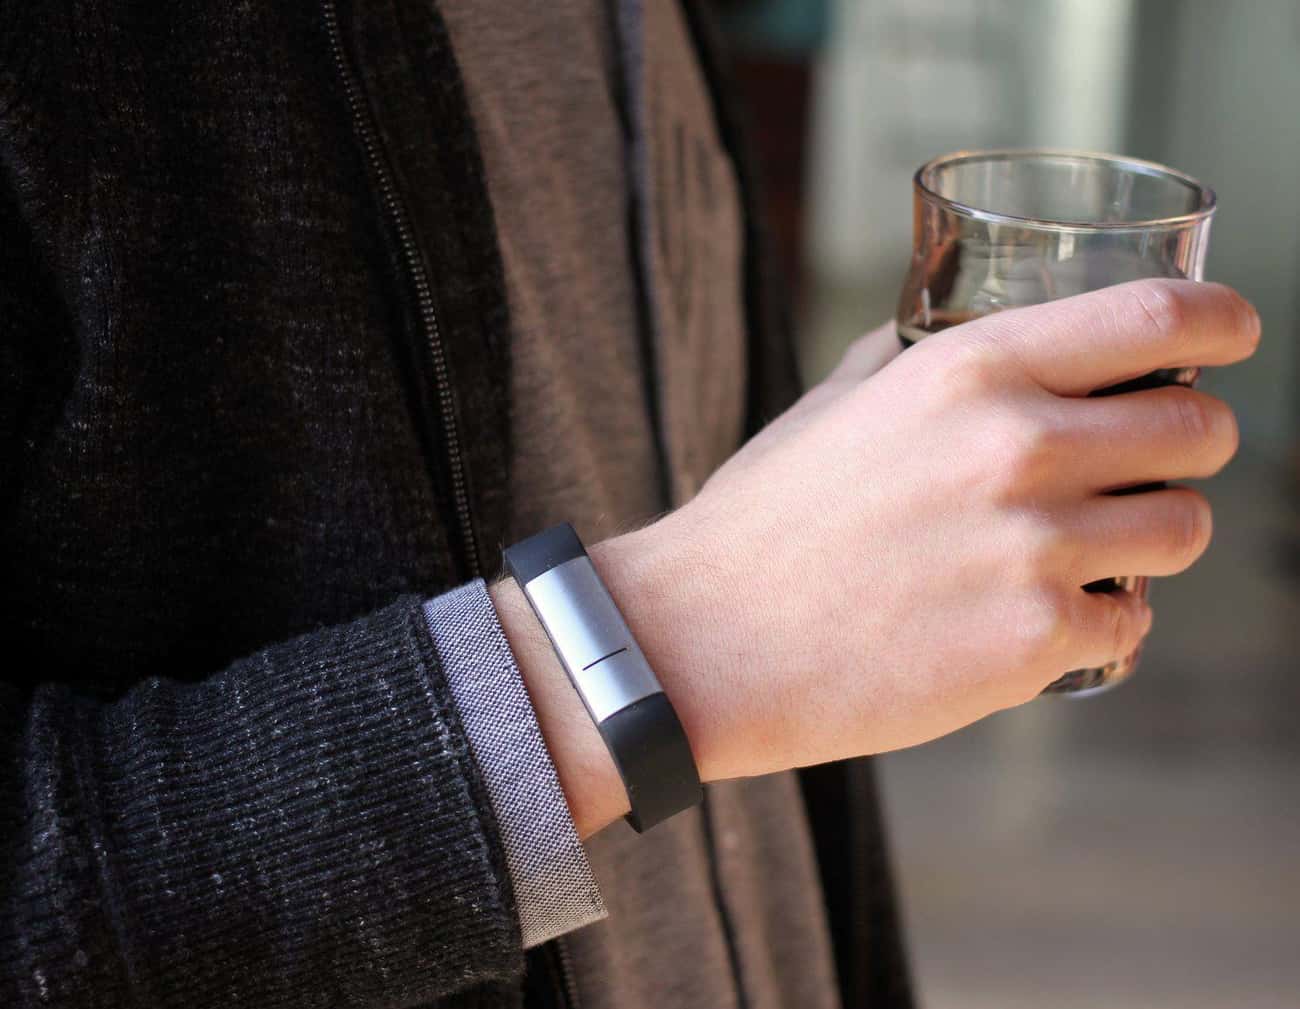 A Wristband That Can Tell You If You're Too Drunk To Drive